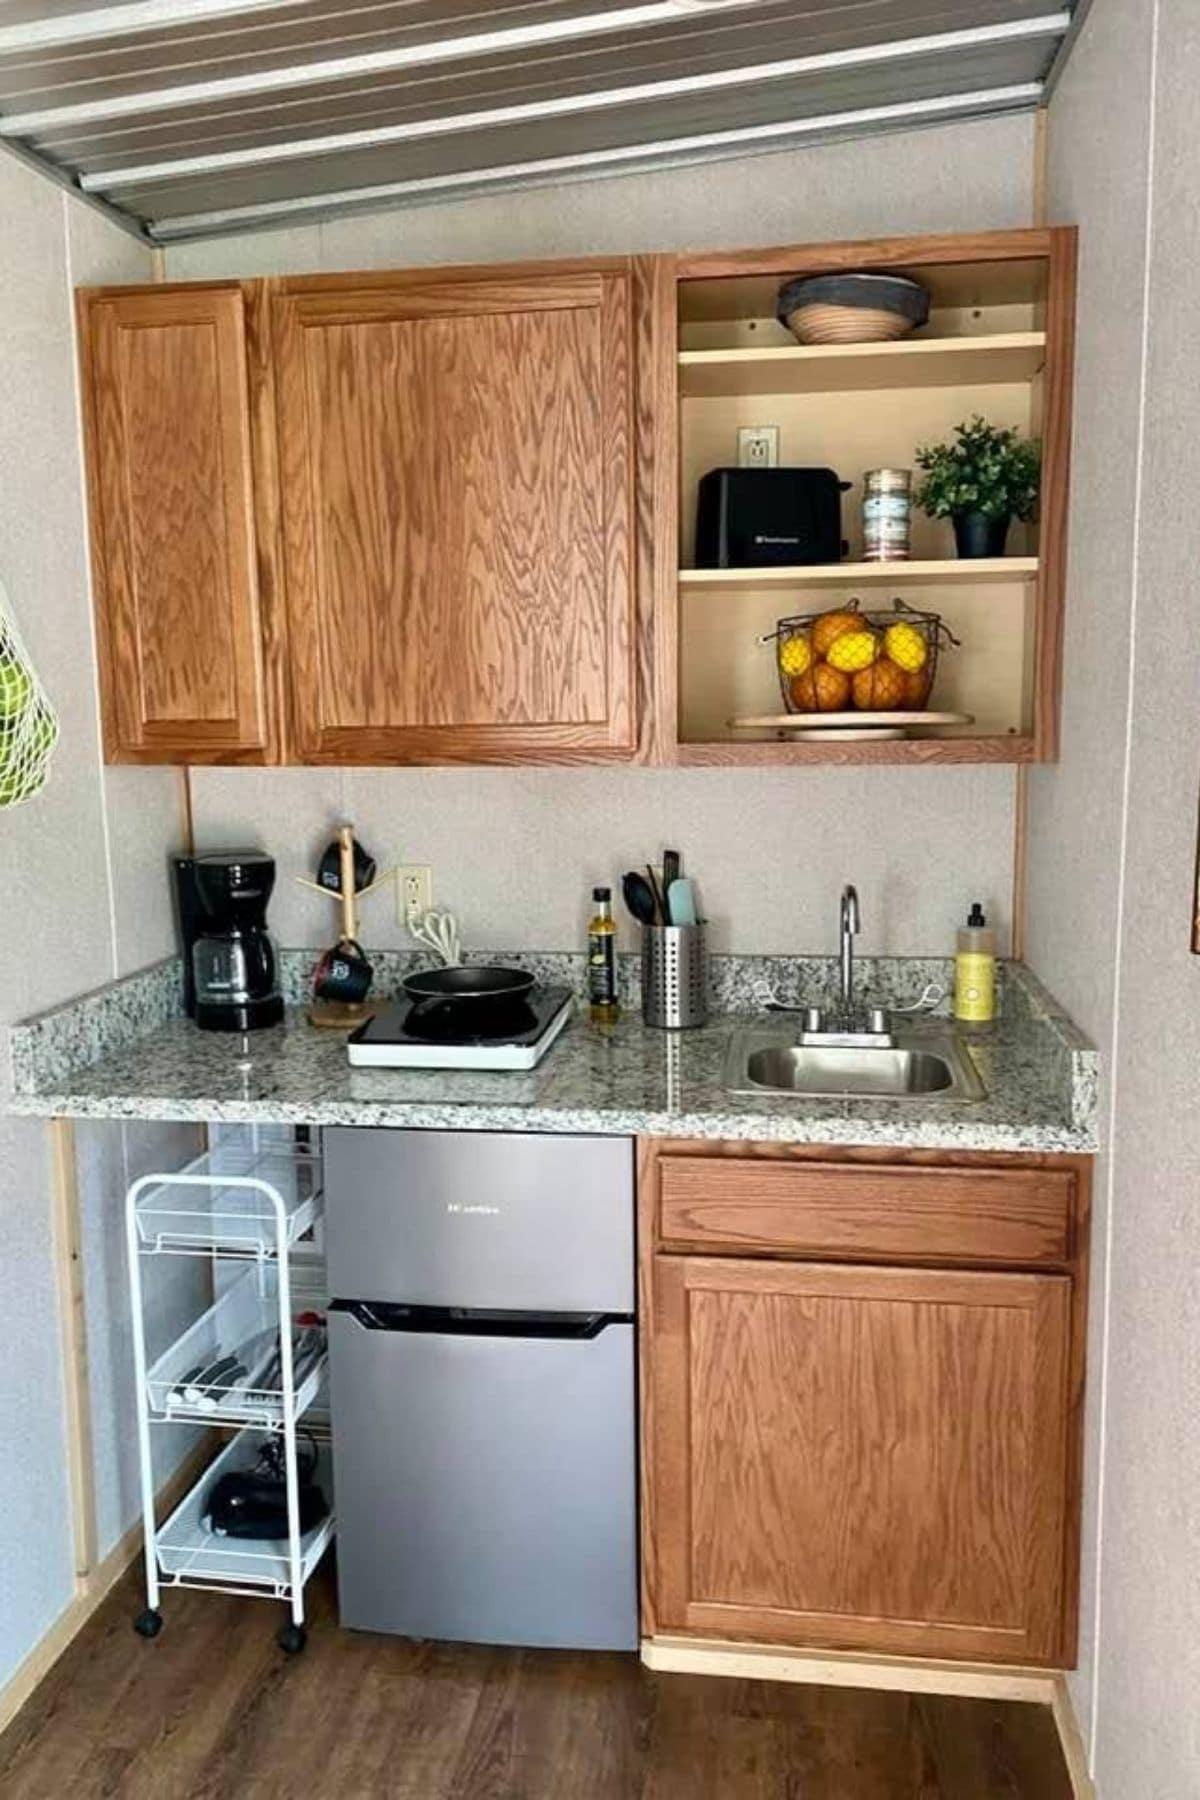 kitchenette against back wall of tiny home